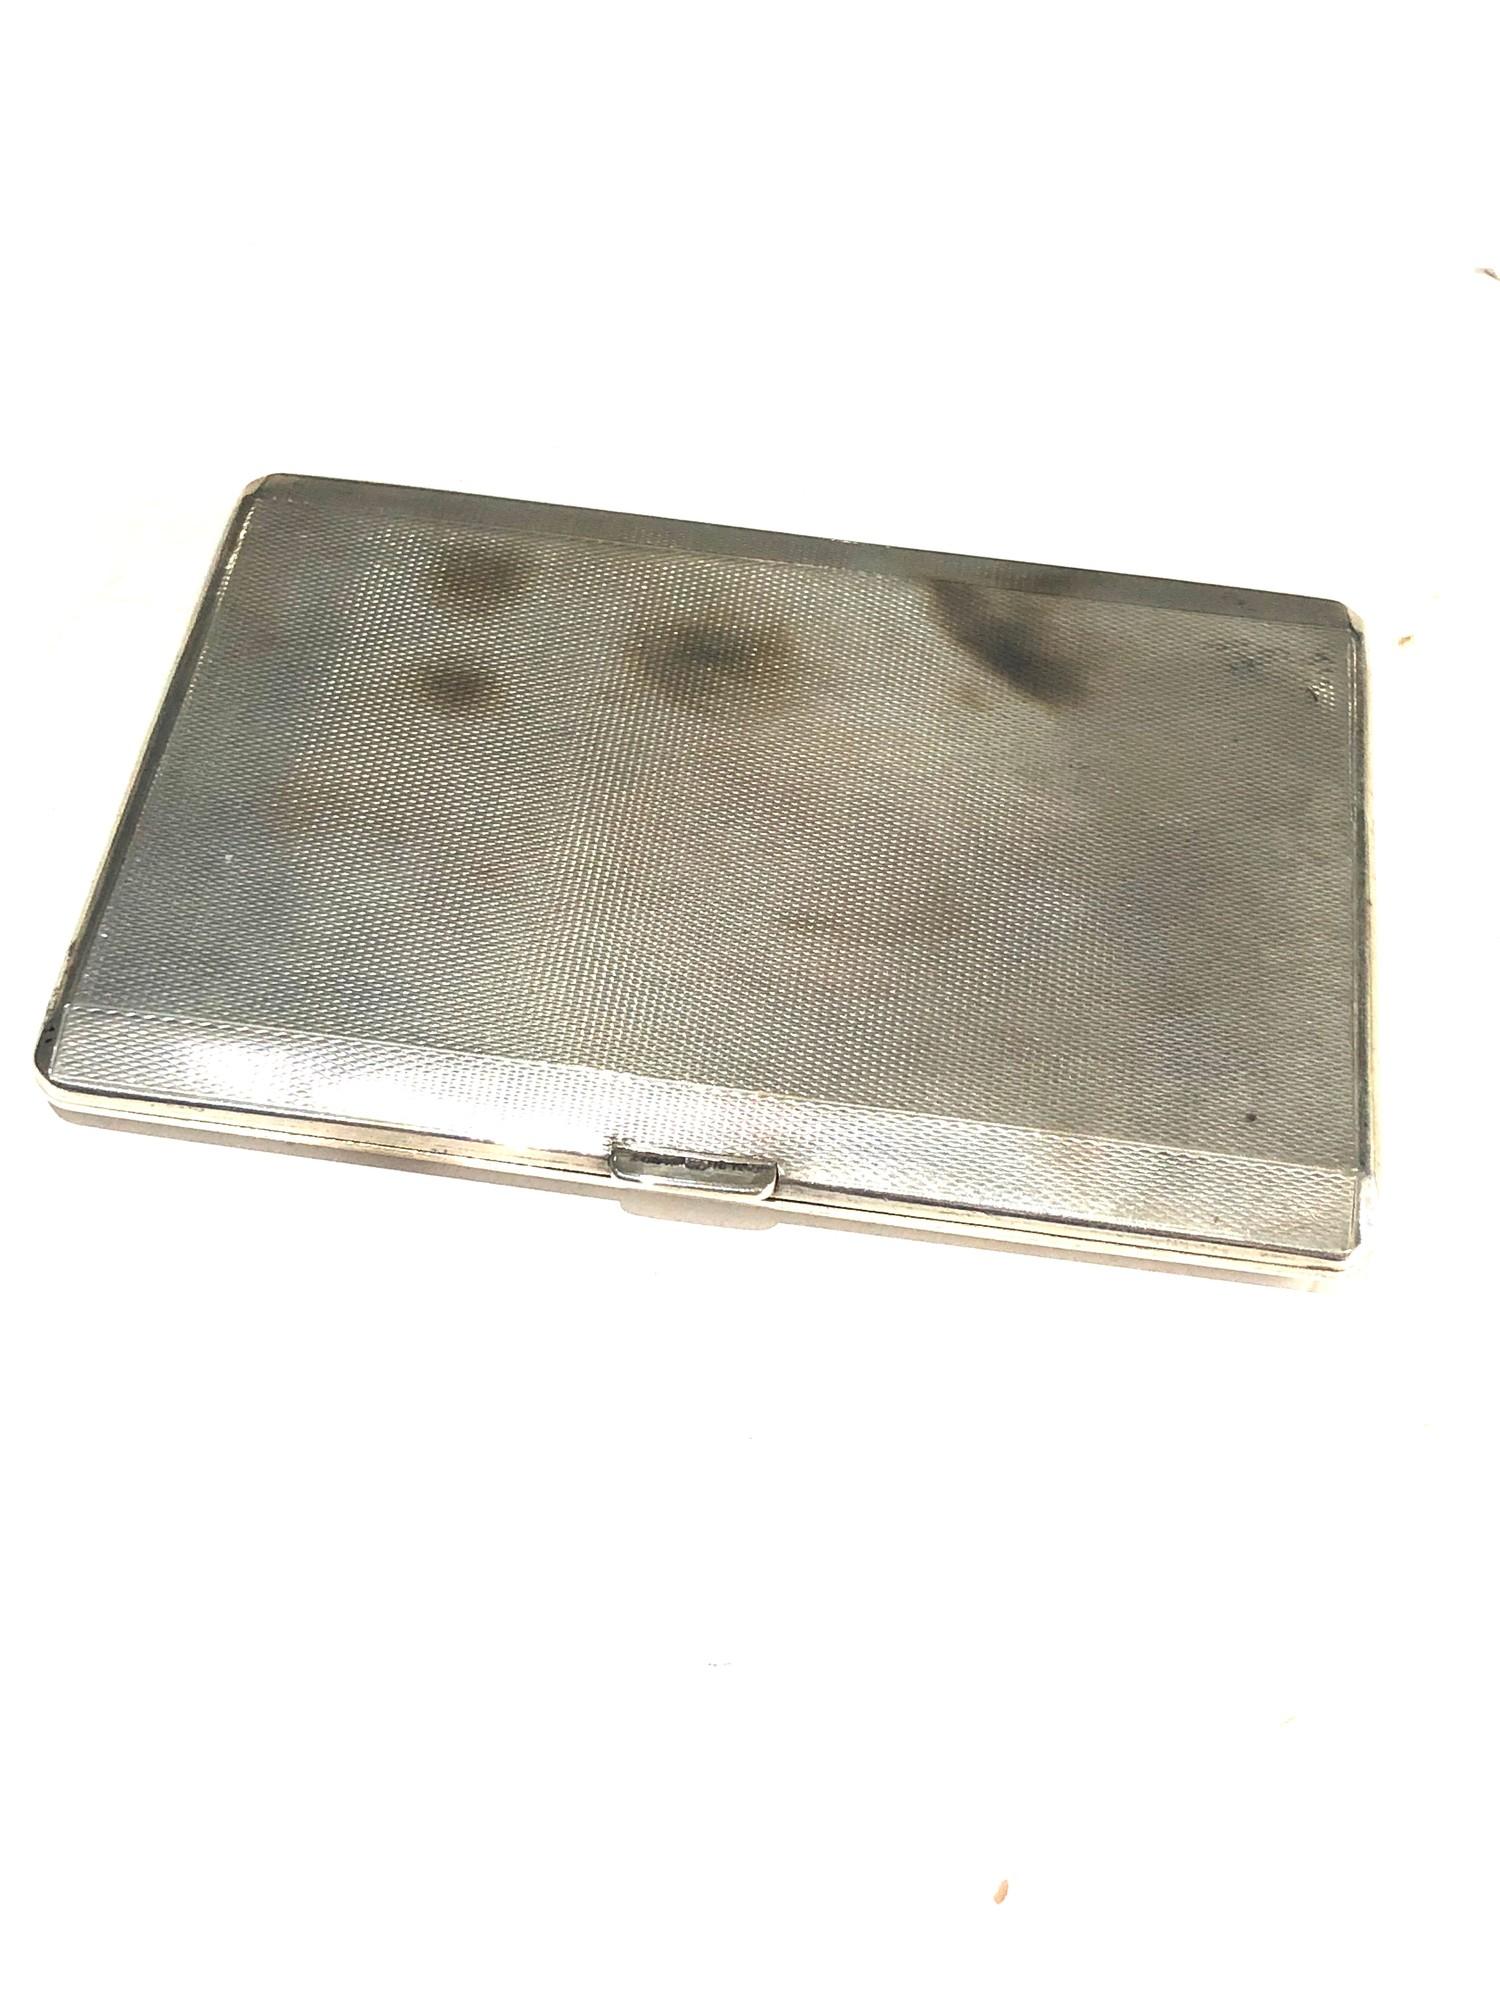 Engine turned cigarette case weight 130g - Image 2 of 3